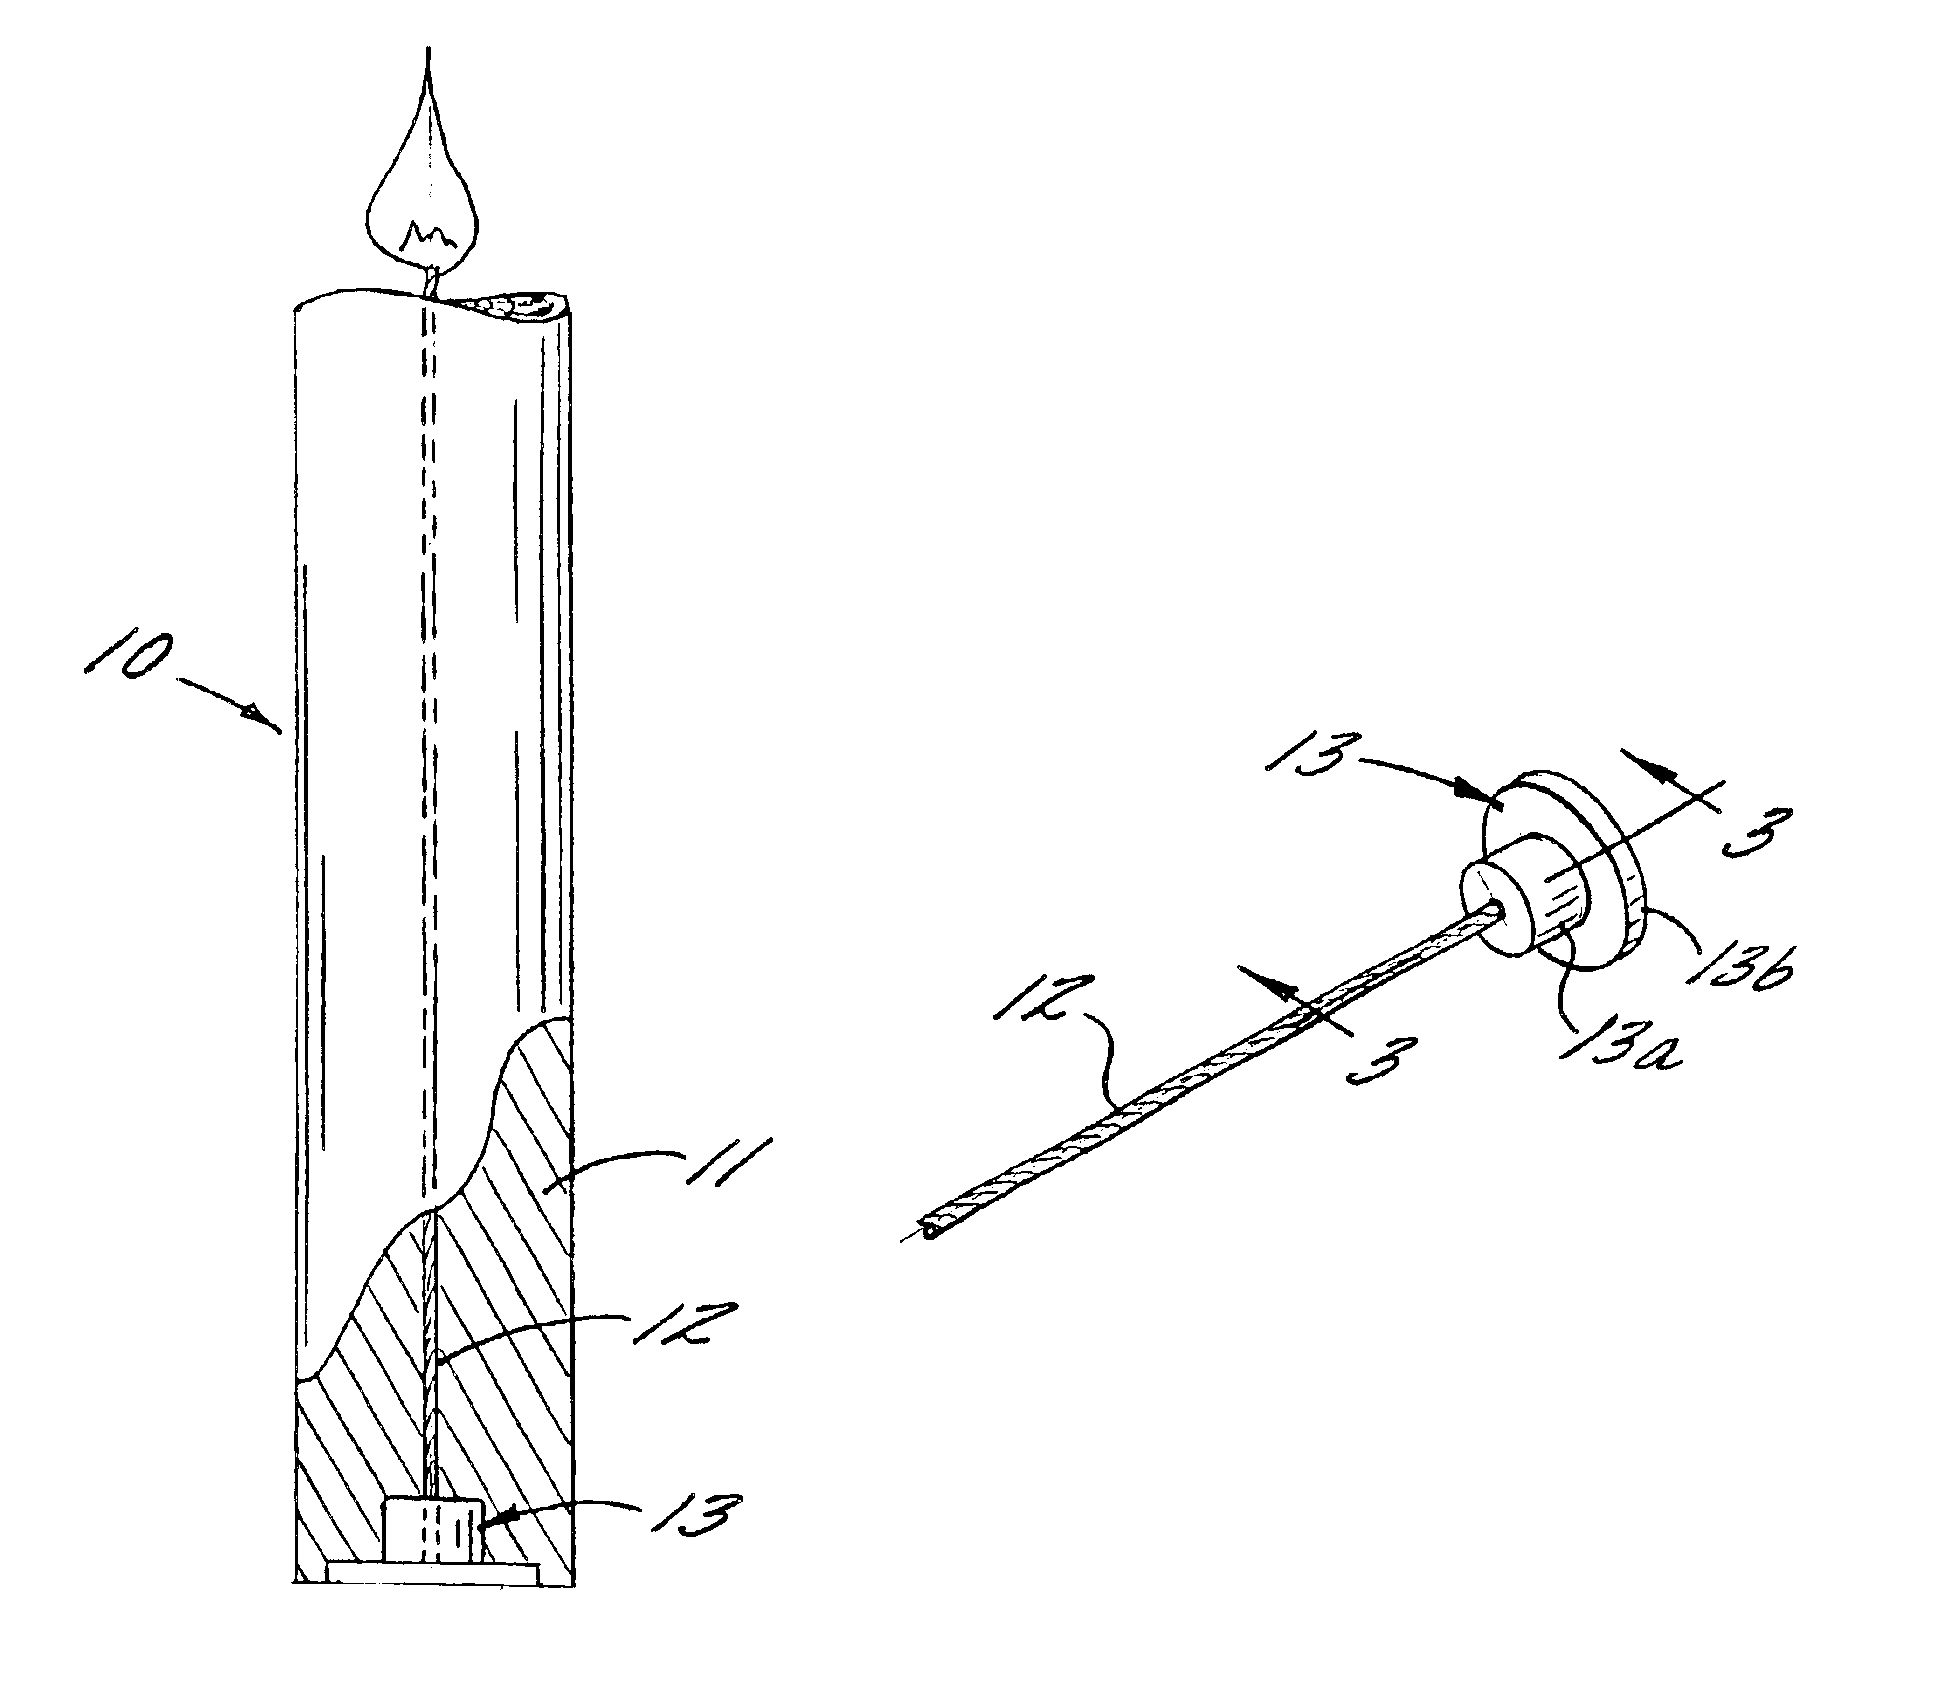 Safety candle and method of forming same